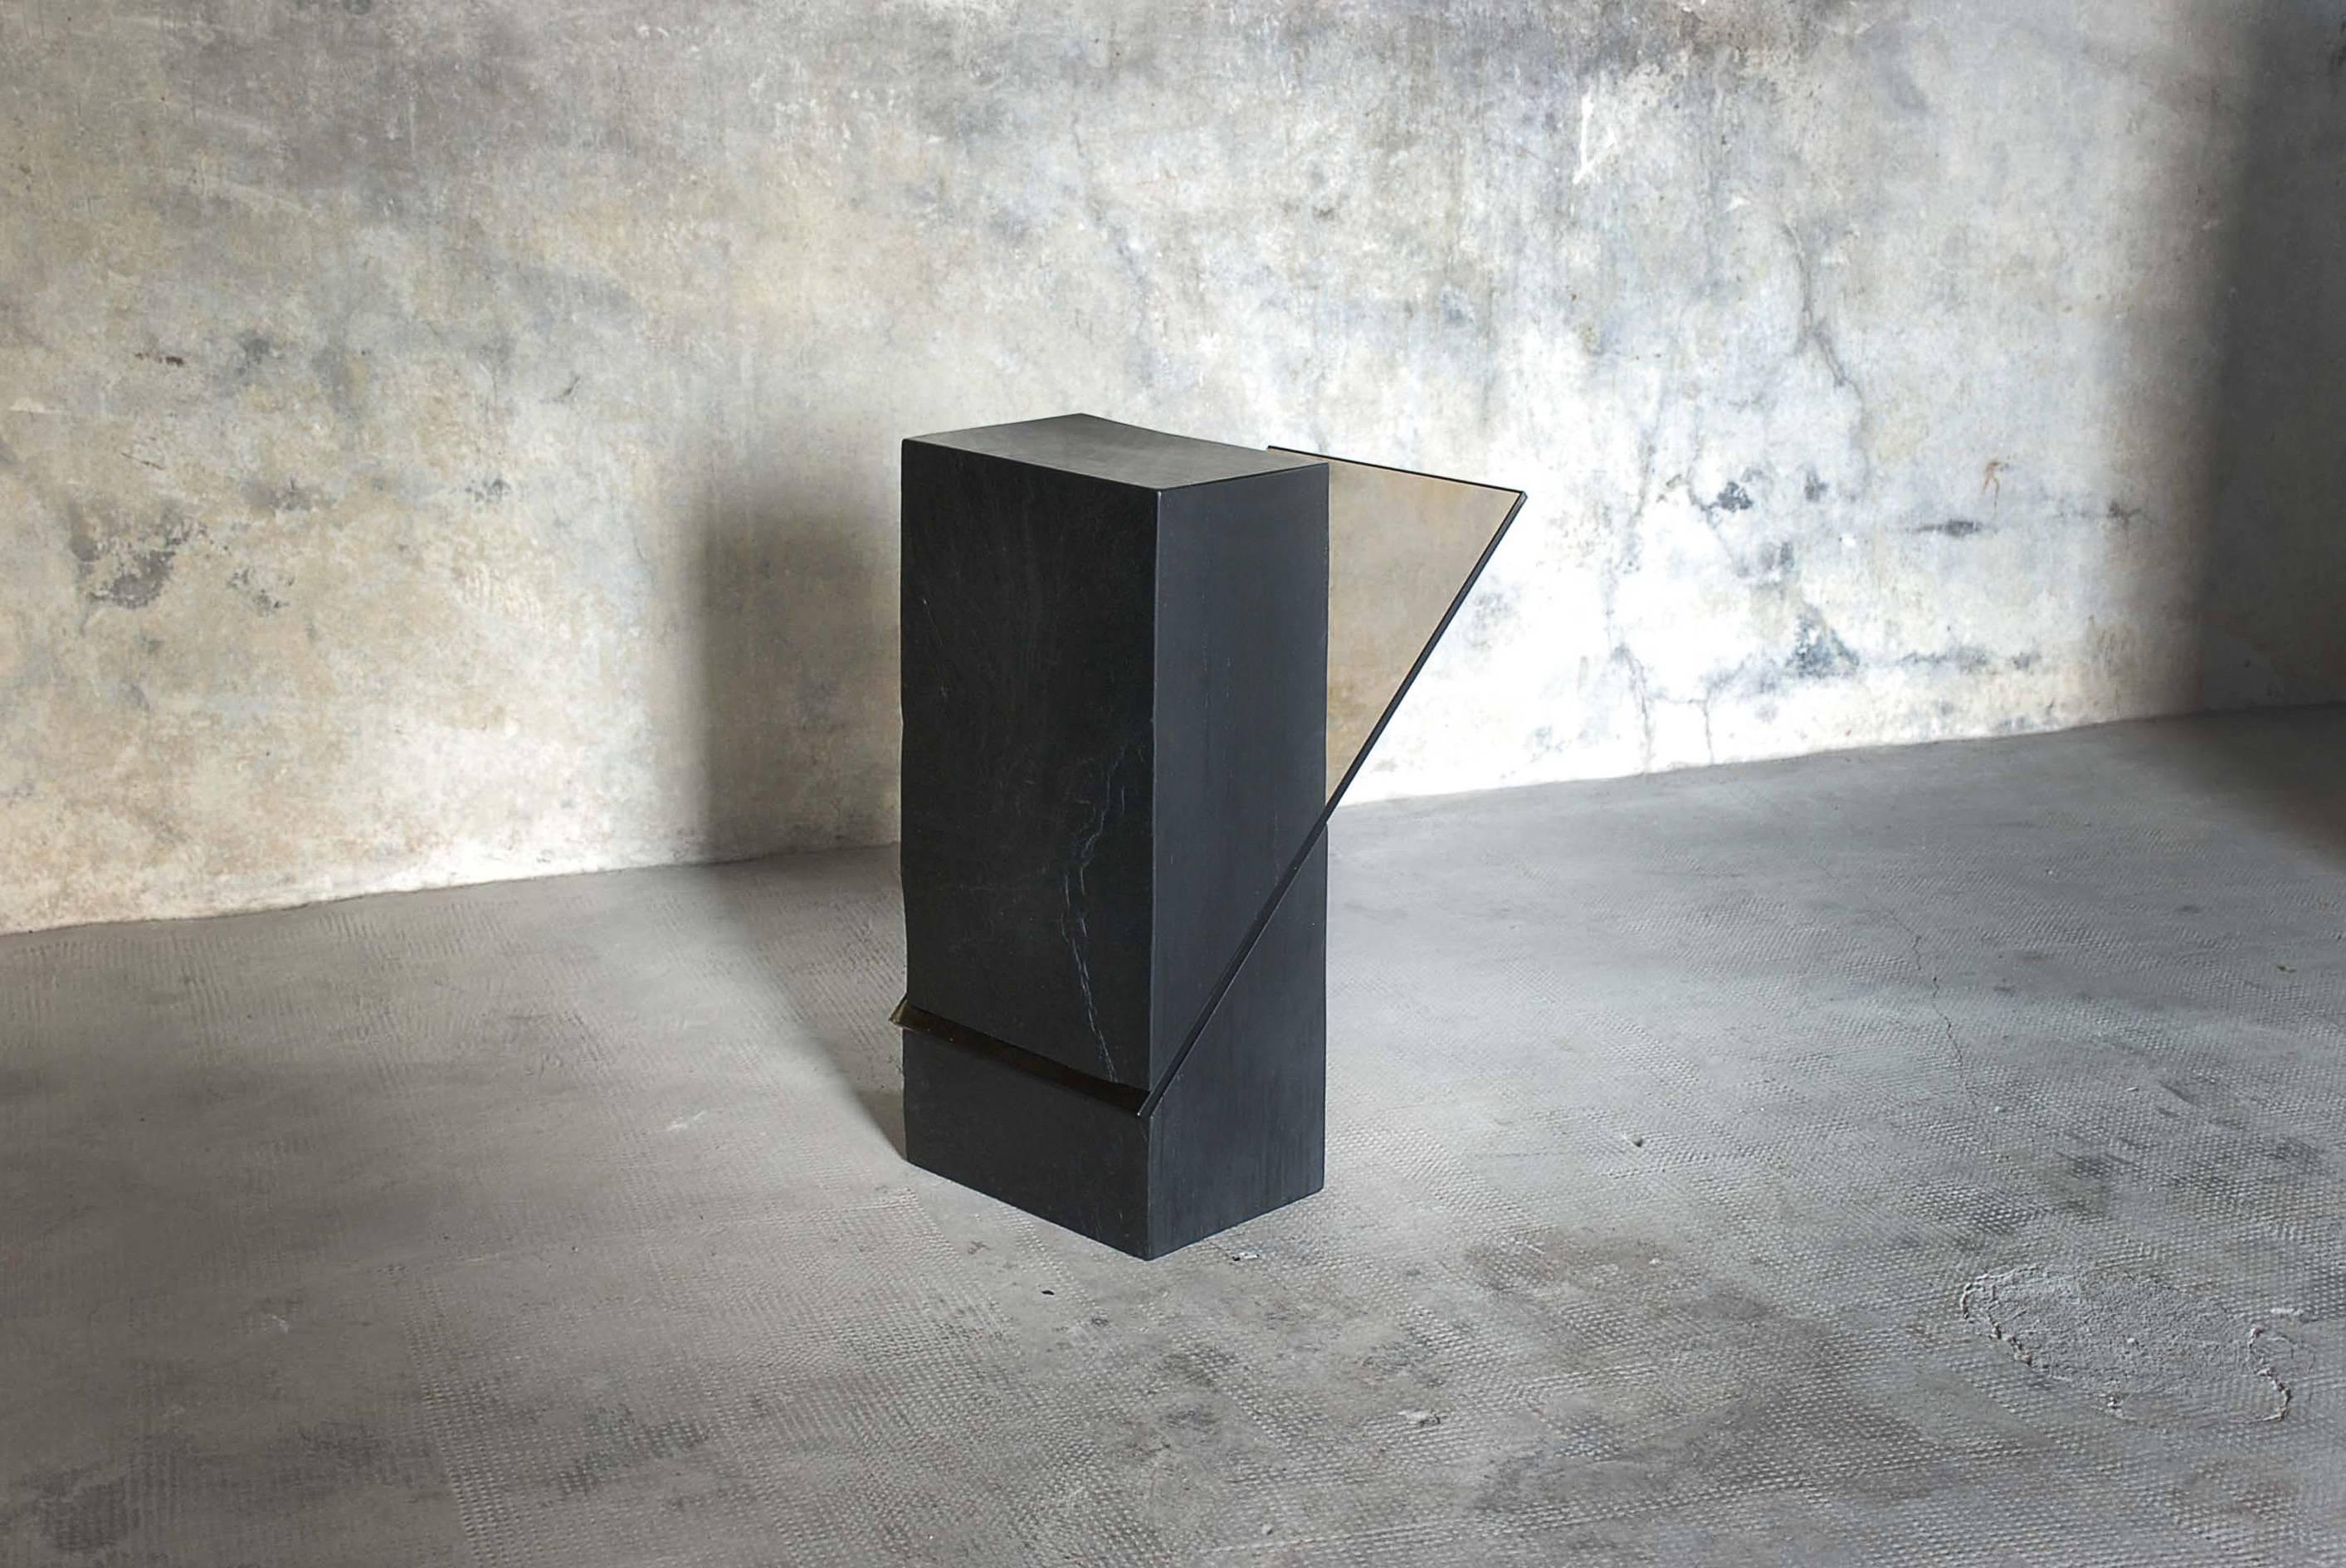 Black Slate Guéridon, Averti, Frederic Saulou
Materials: Black slate, grey smoked glass.
Dimensions: W 25 x D 18 x H 50 cm

Edition of eight.
Signed and numbered.

